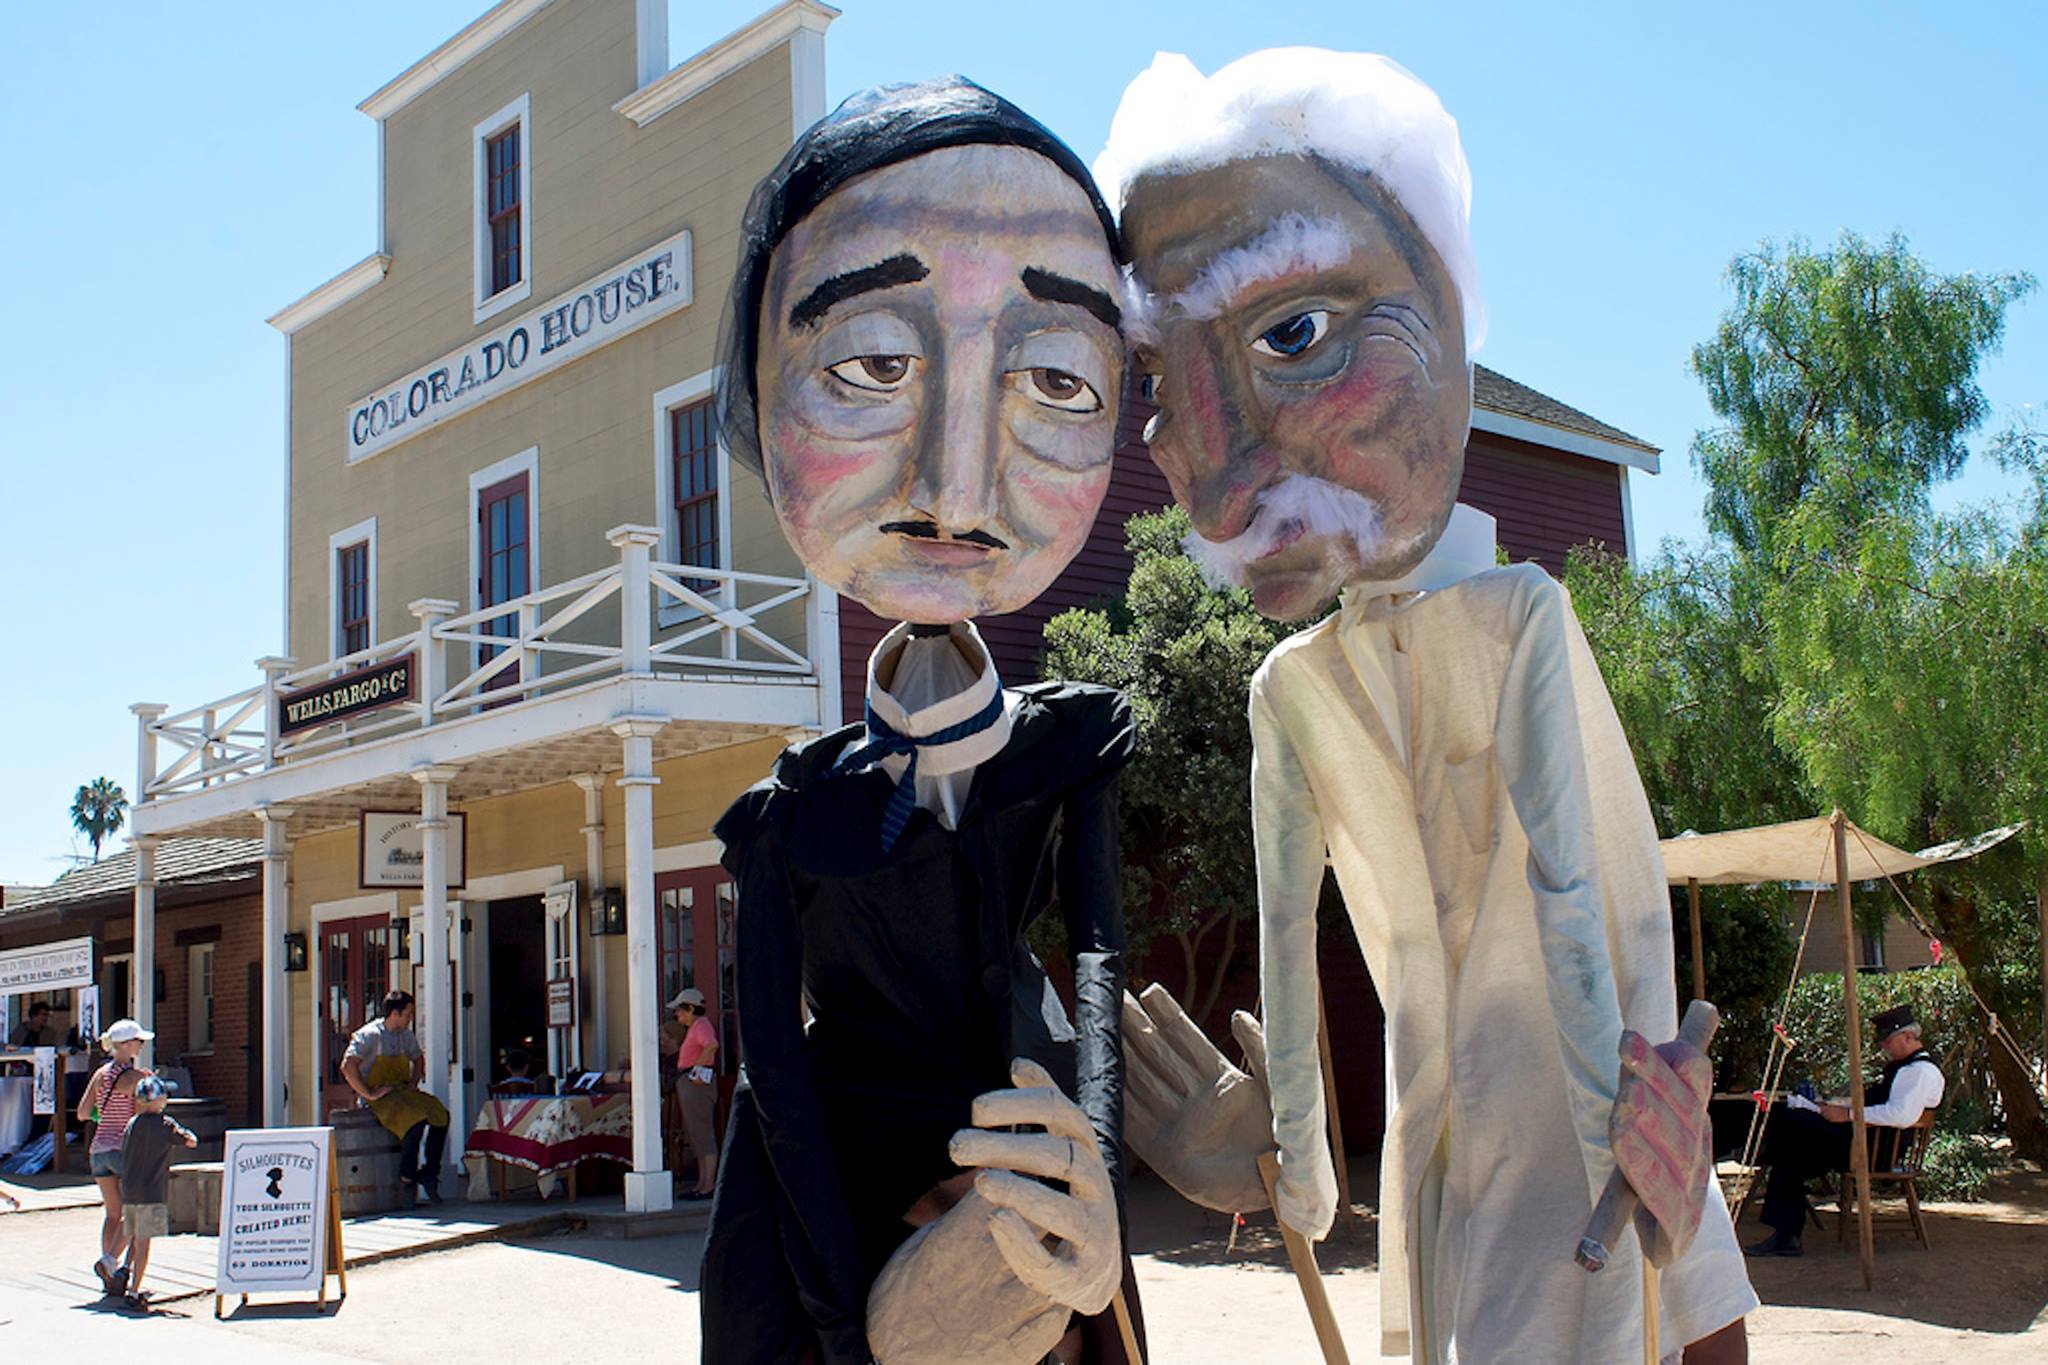 TwainFest in Old Town - Top Things to Do in San Diego